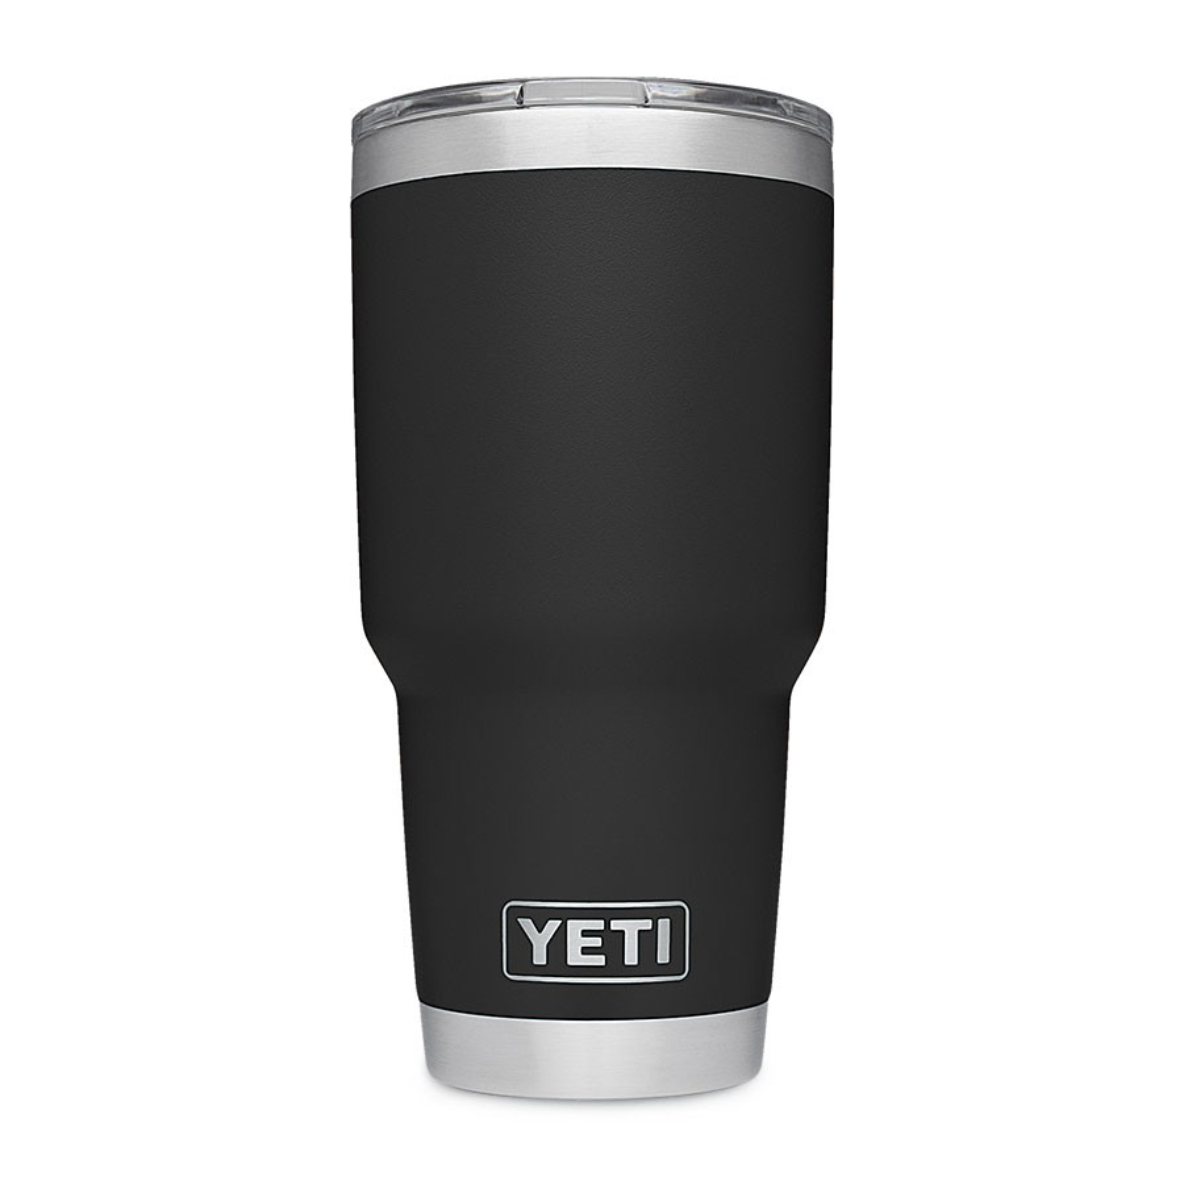 Get 50% off Yeti Coolers and Drinkware for  Prime Day